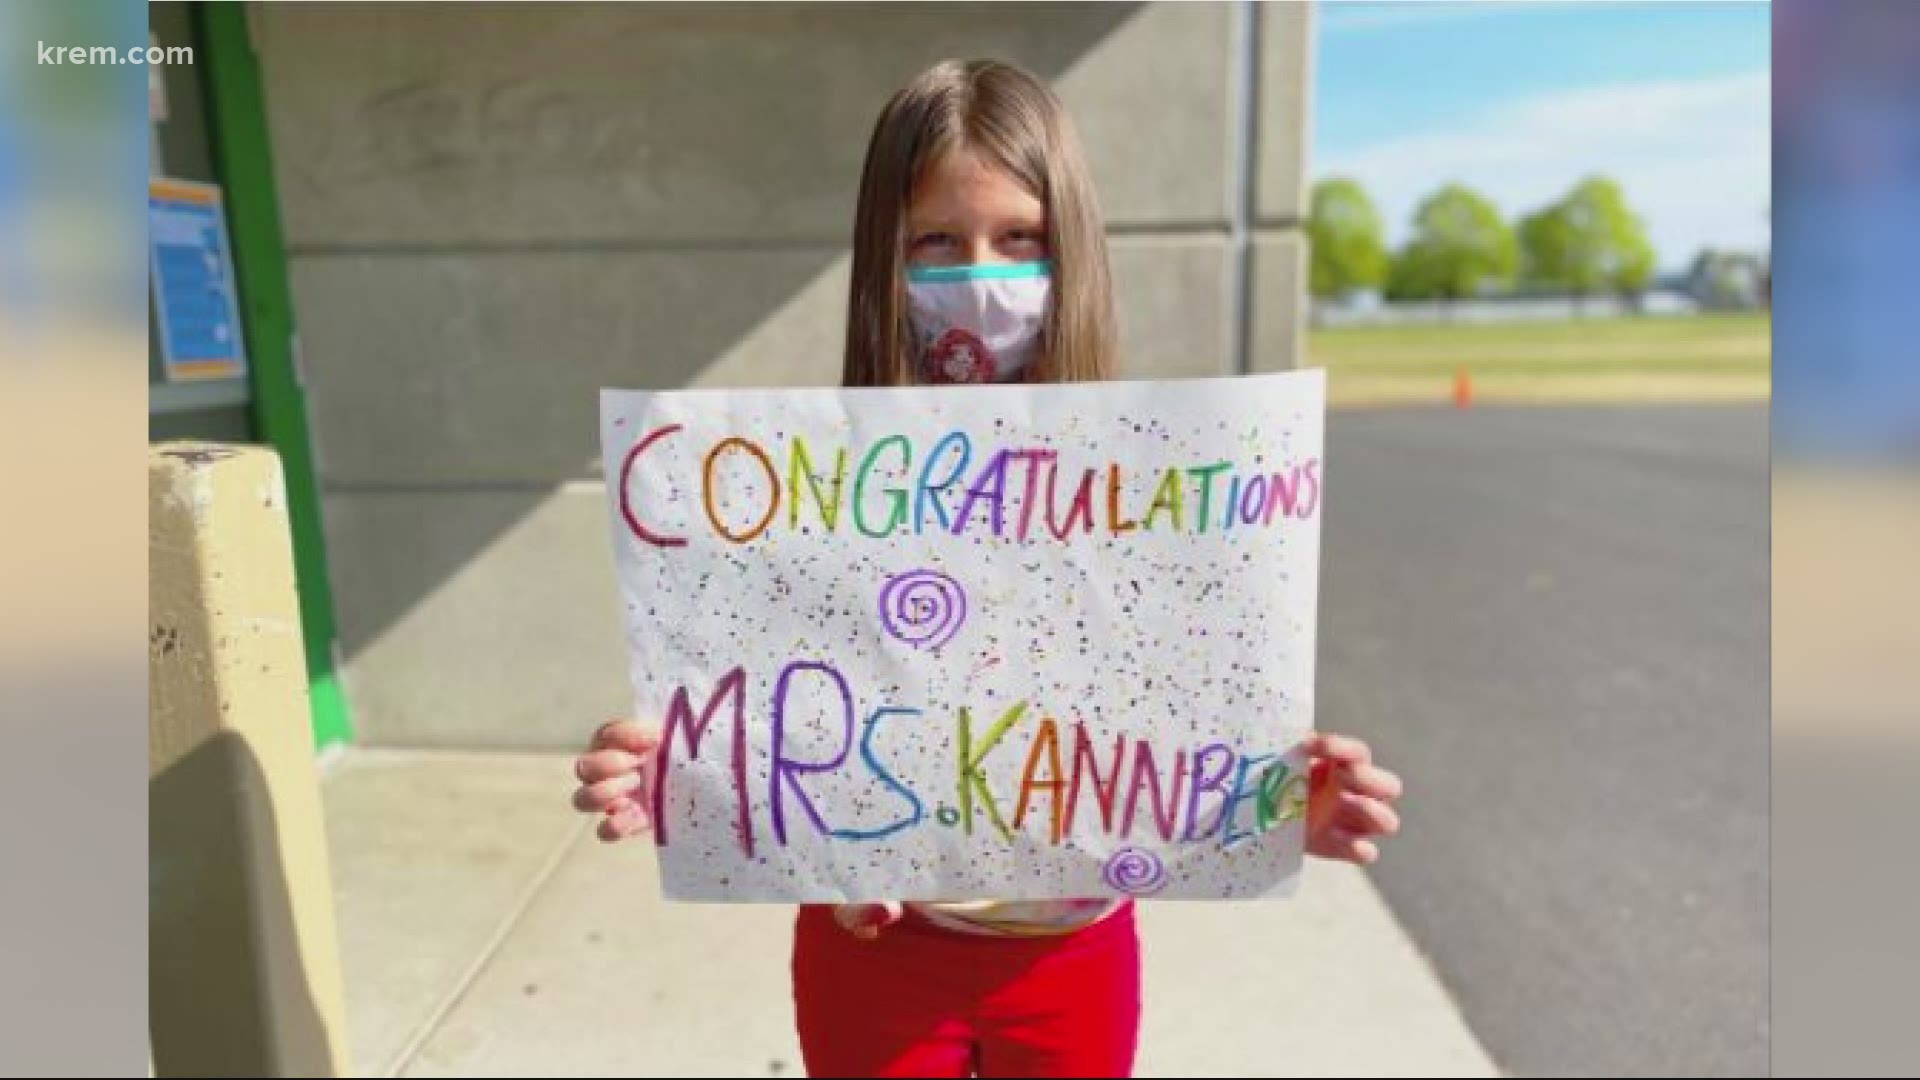 Tricia Kannberg was surprised by students and staff for a celebration of her achievement on Thursday.